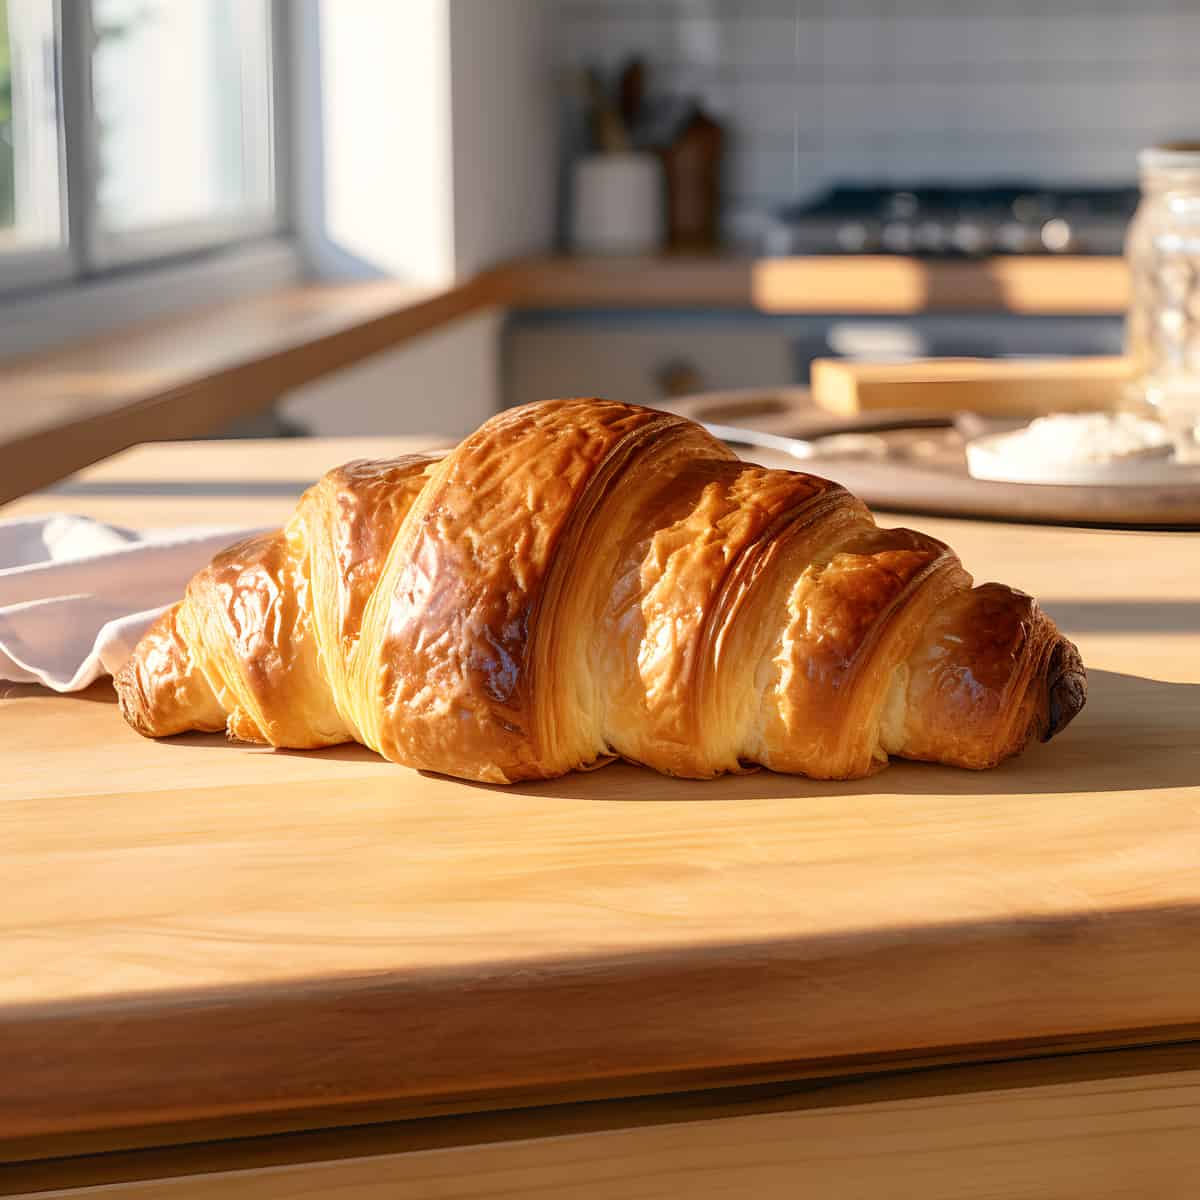 Croissant on a kitchen counter